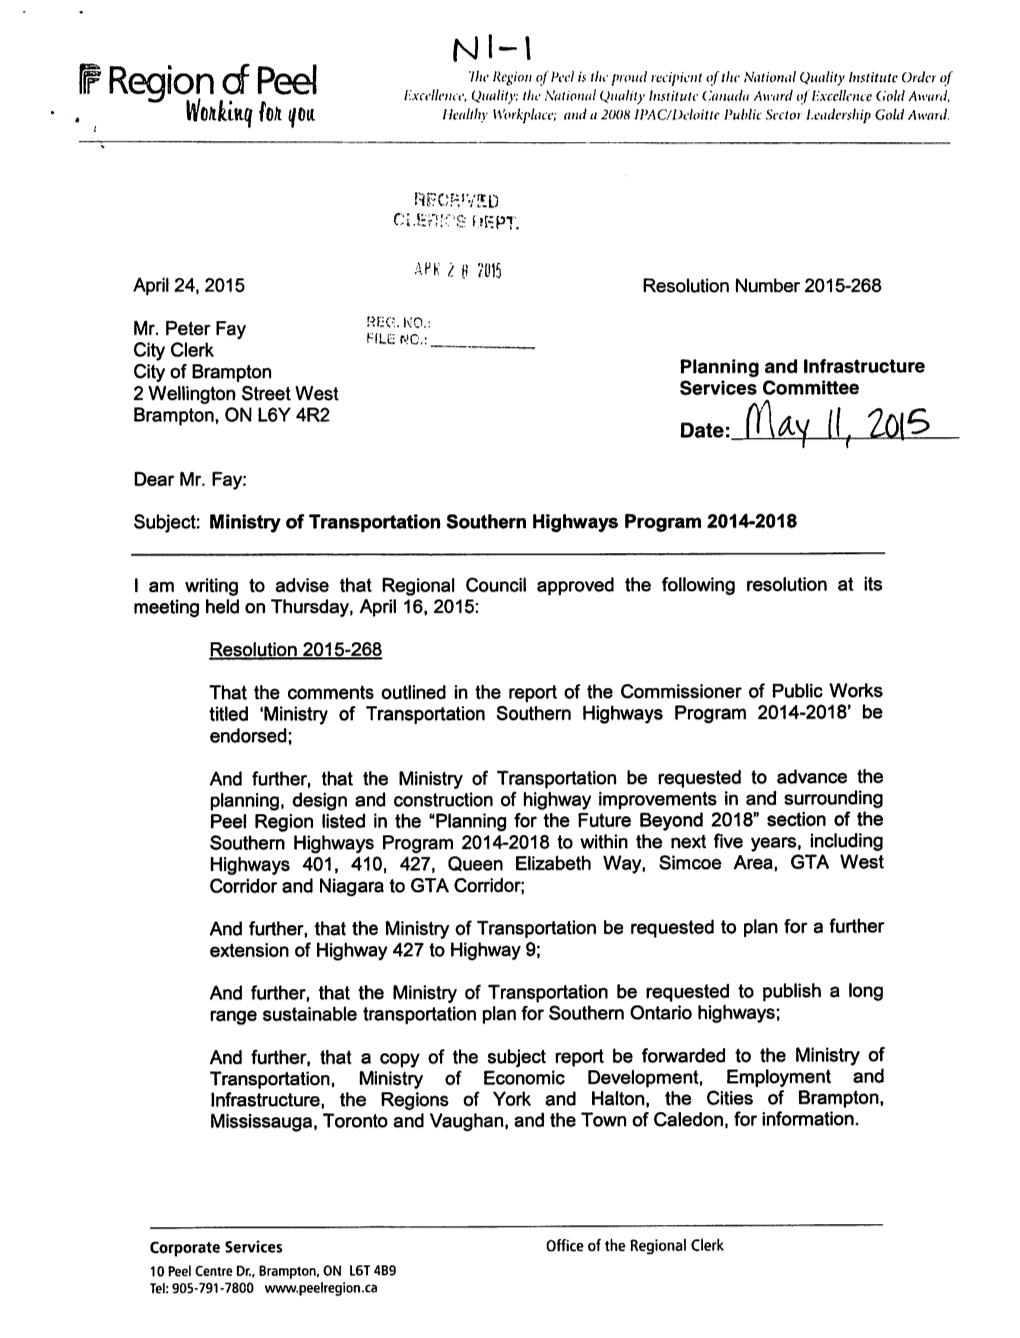 Planning and Infrastructure Services Committee Item N1 for May 11, 2015